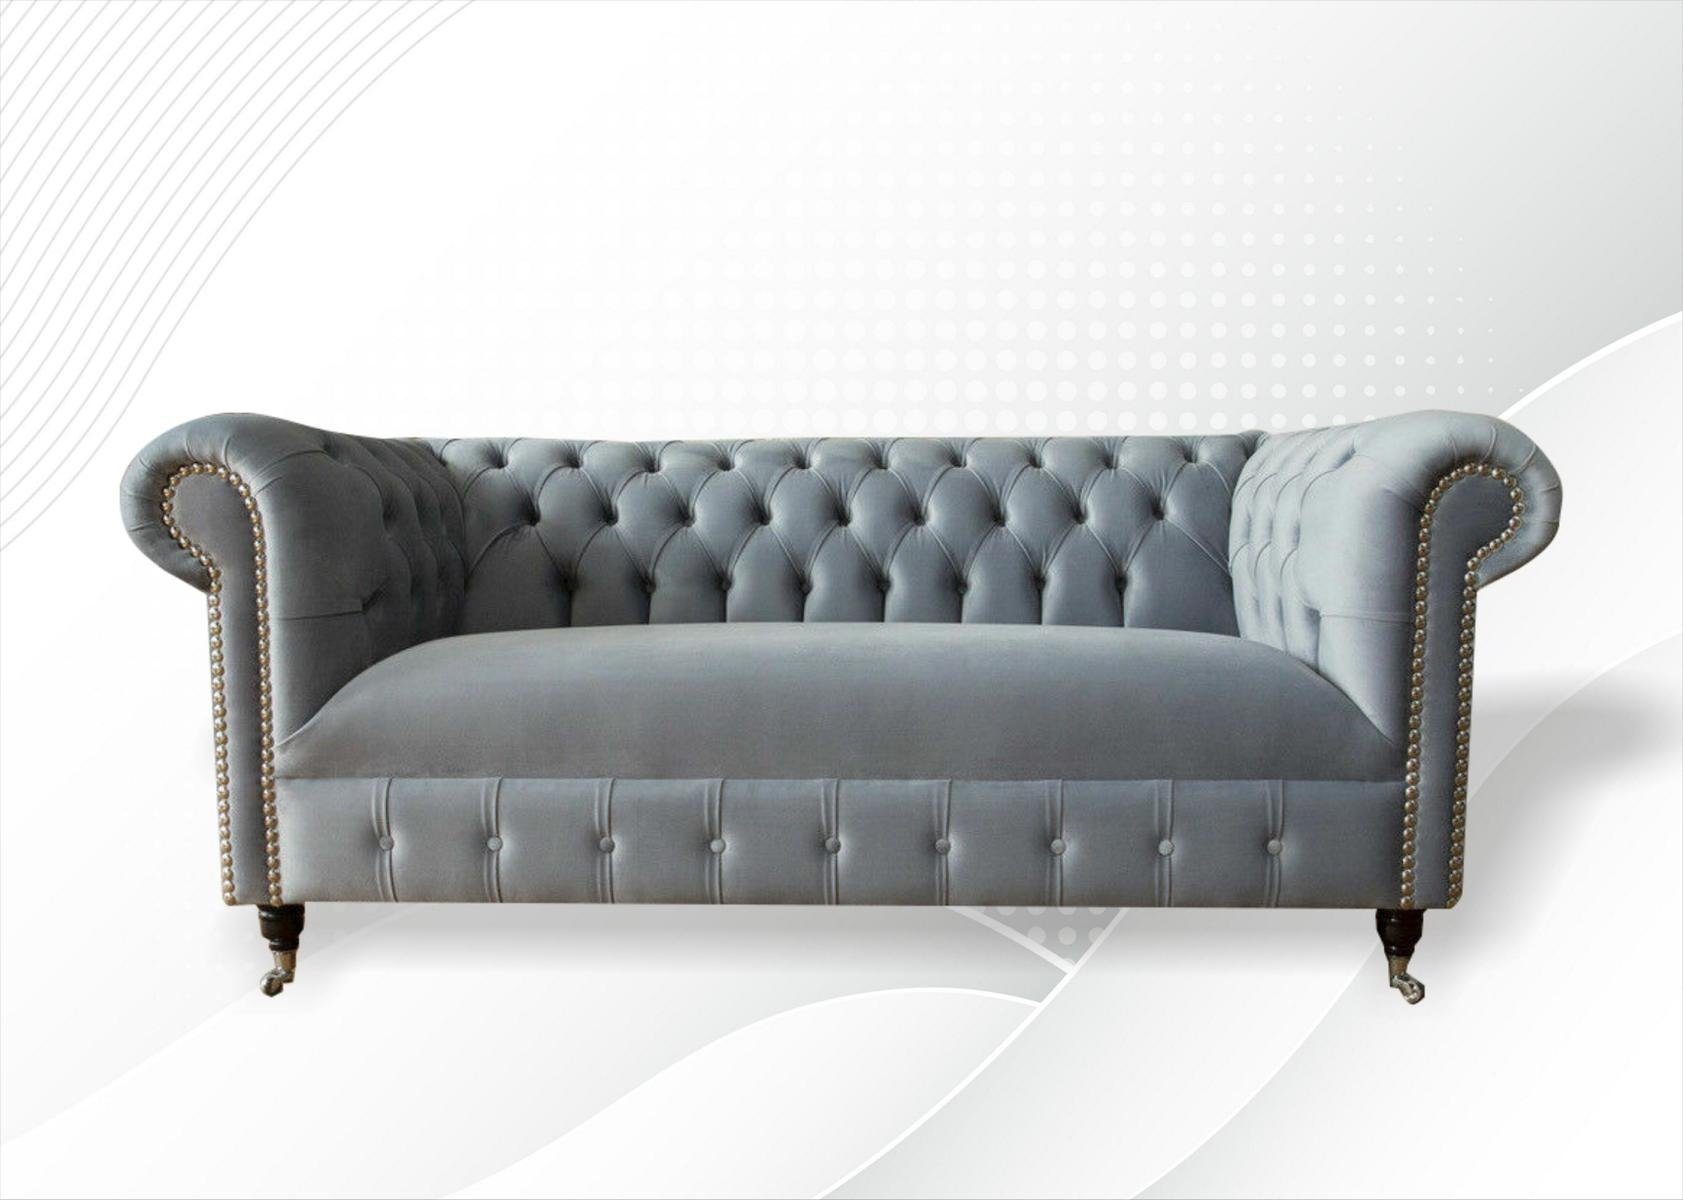 Stoff Sofa Chesterfield Europe Leder Textilmöbel, Couch in Sofa Couchen JVmoebel Polster Made